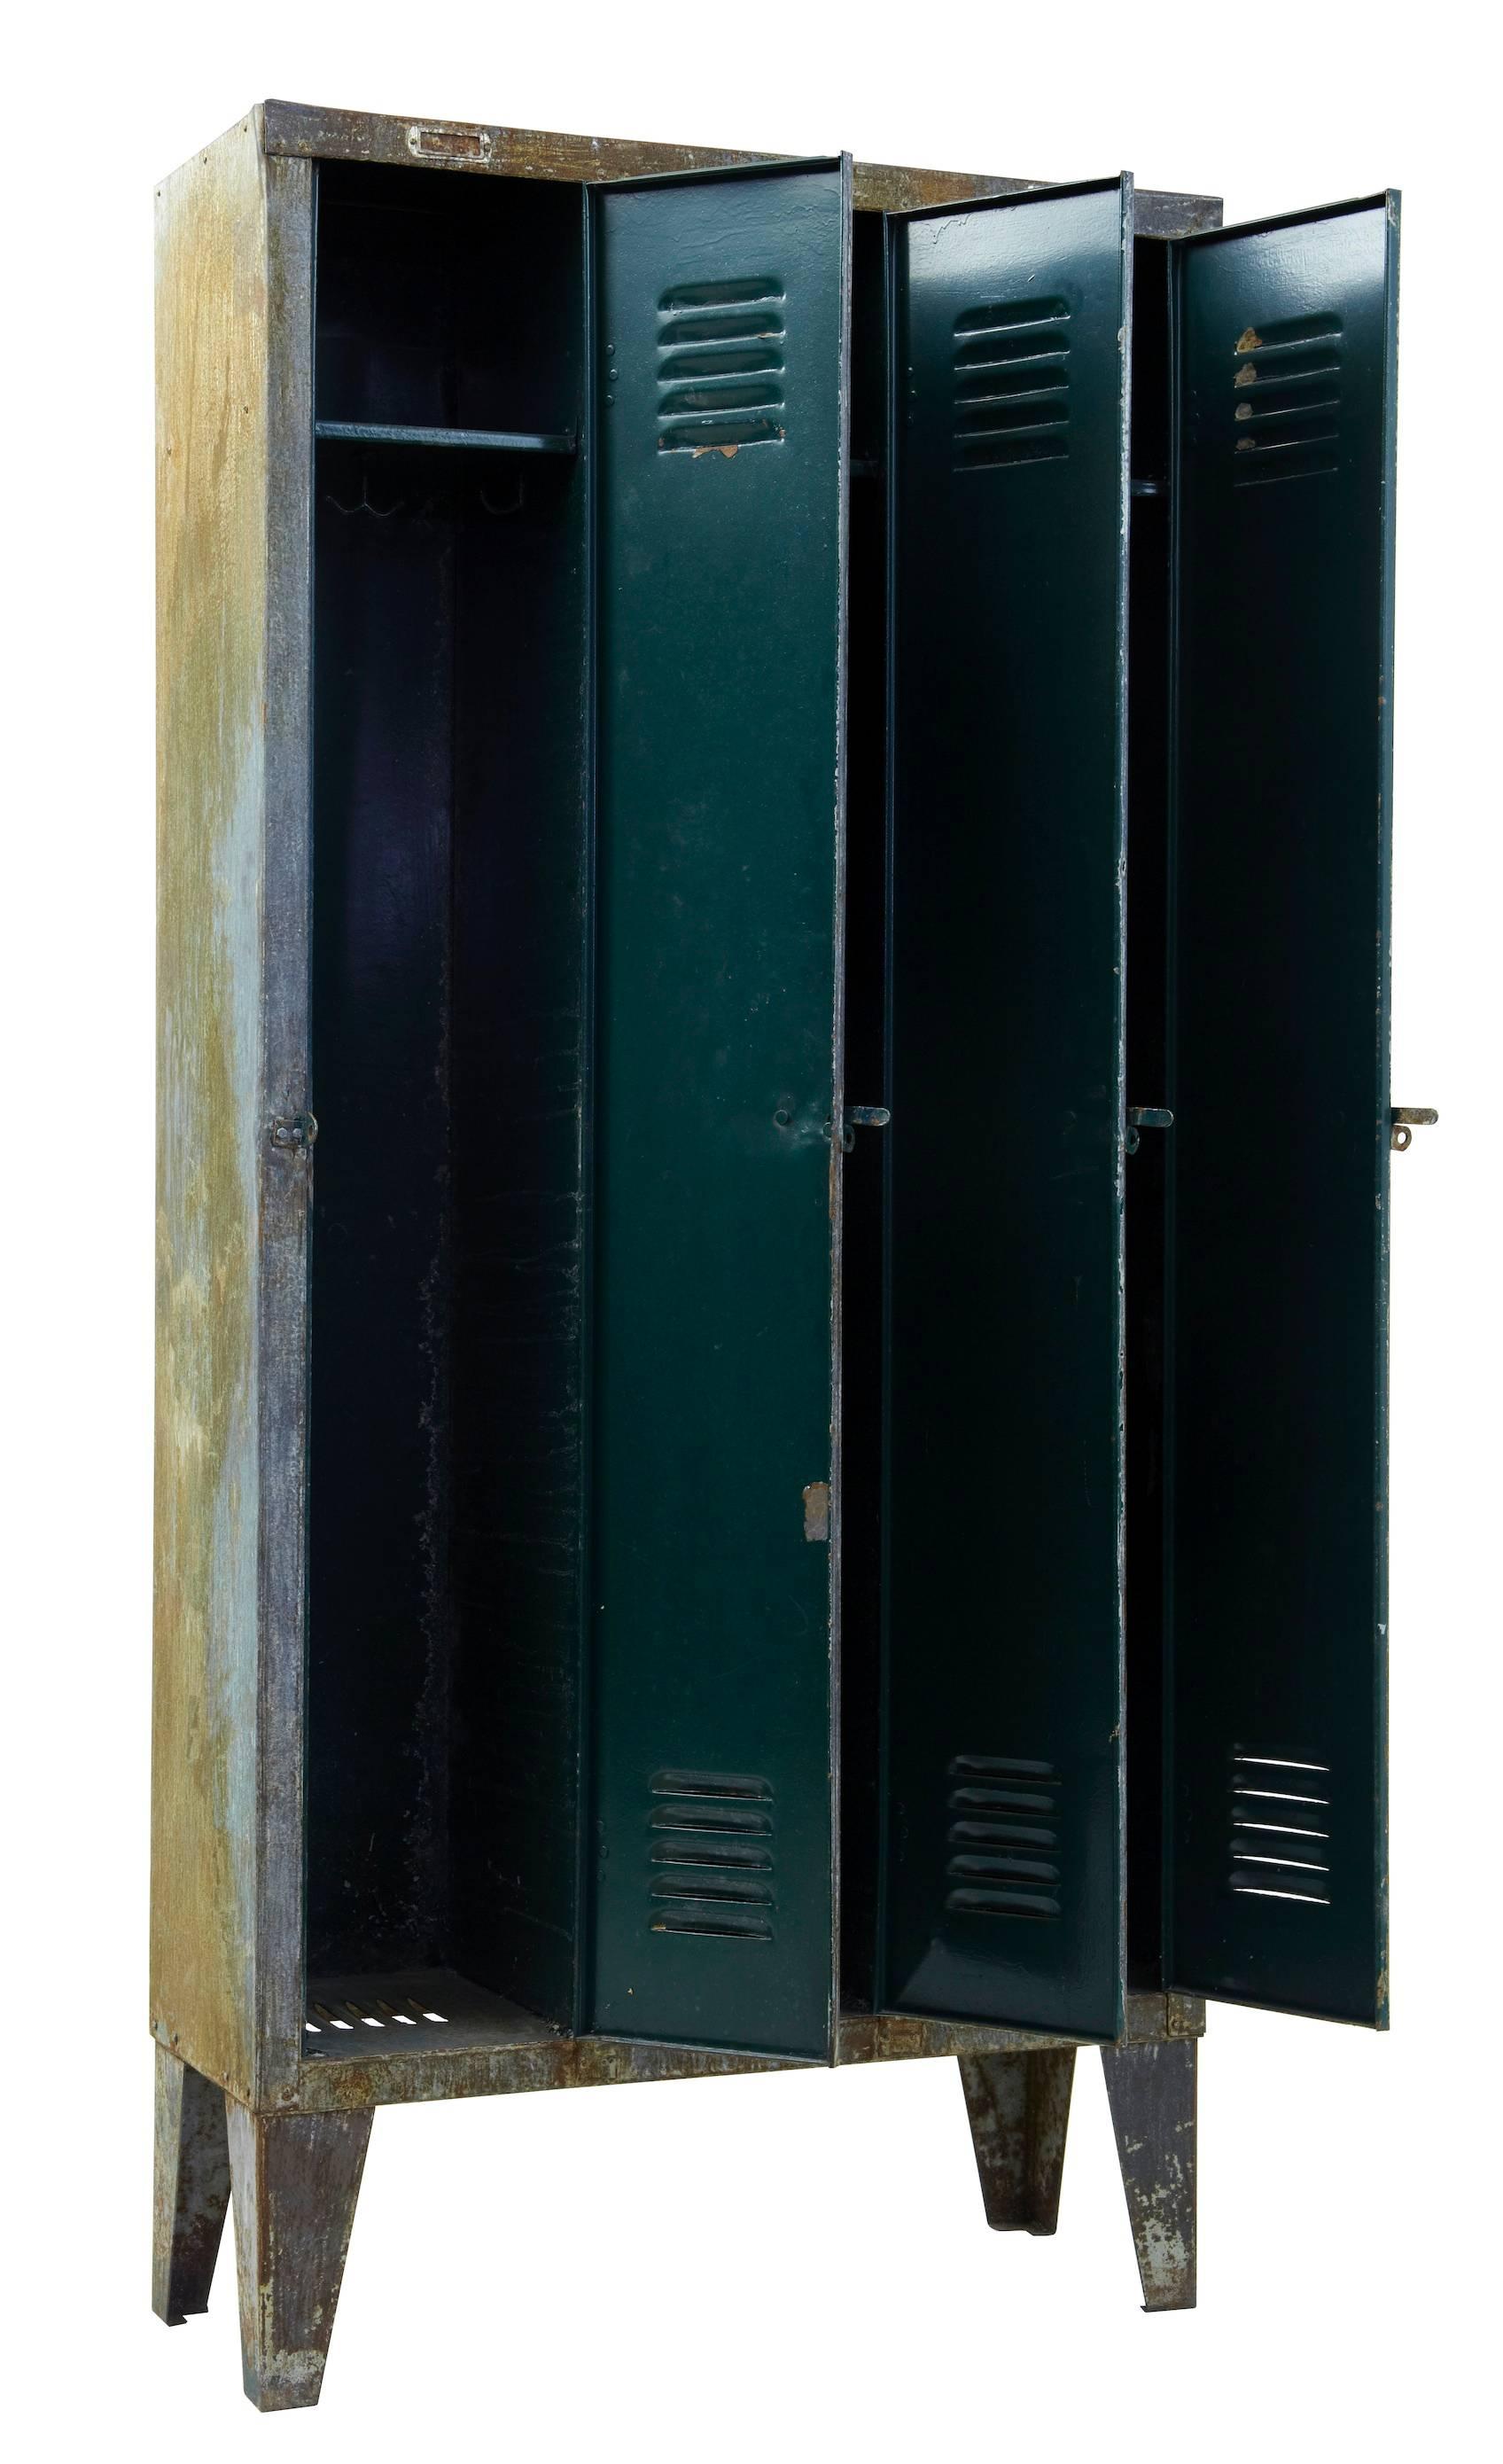 3 door 1960's locker room cabinet with distressed finish.
Please note we have 2 of these, you are bidding for 1.

Height: 78 3/4